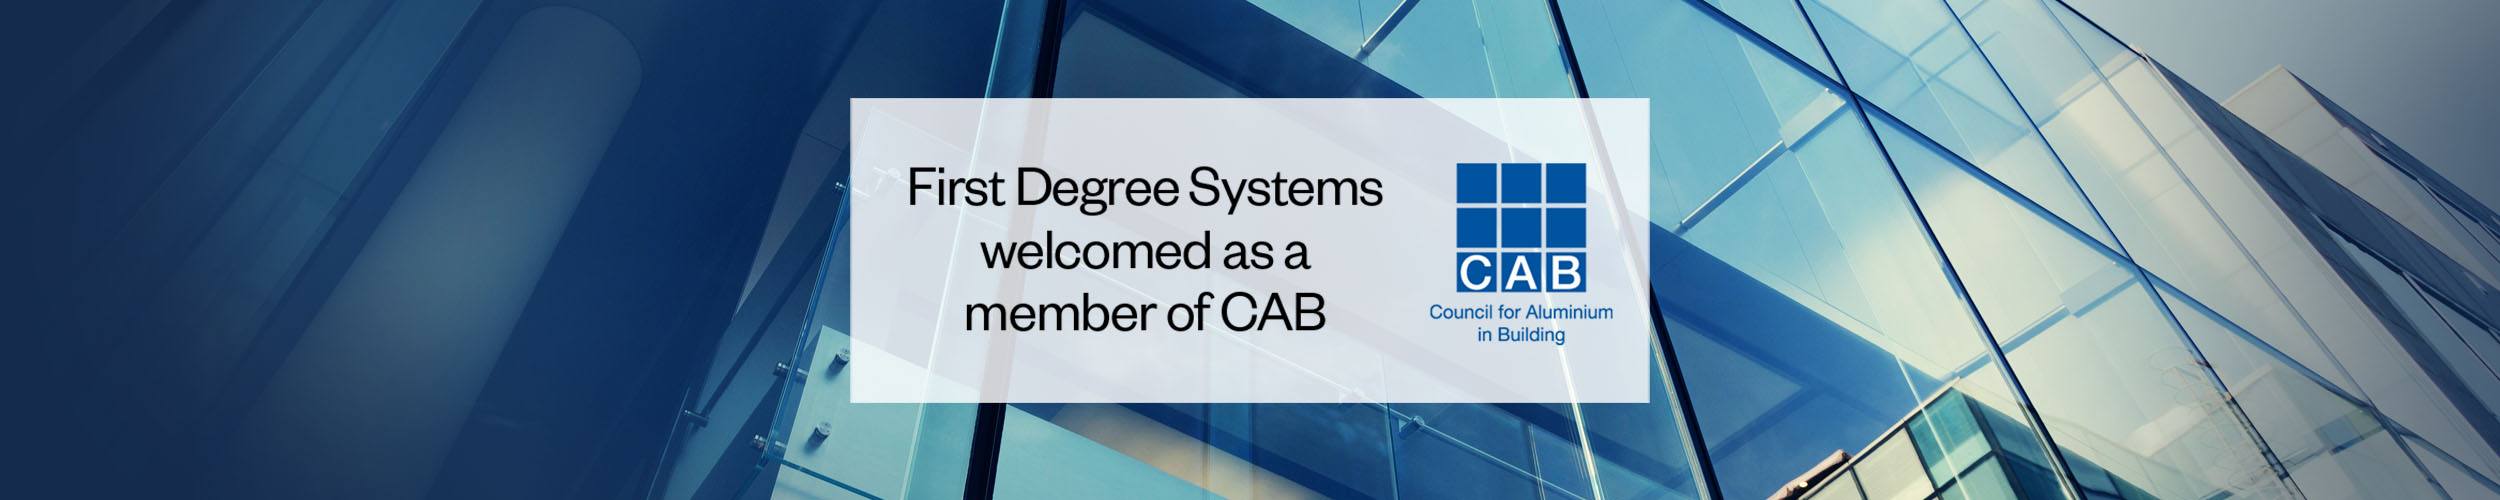 First Degree Systems welcomed as member of CAB